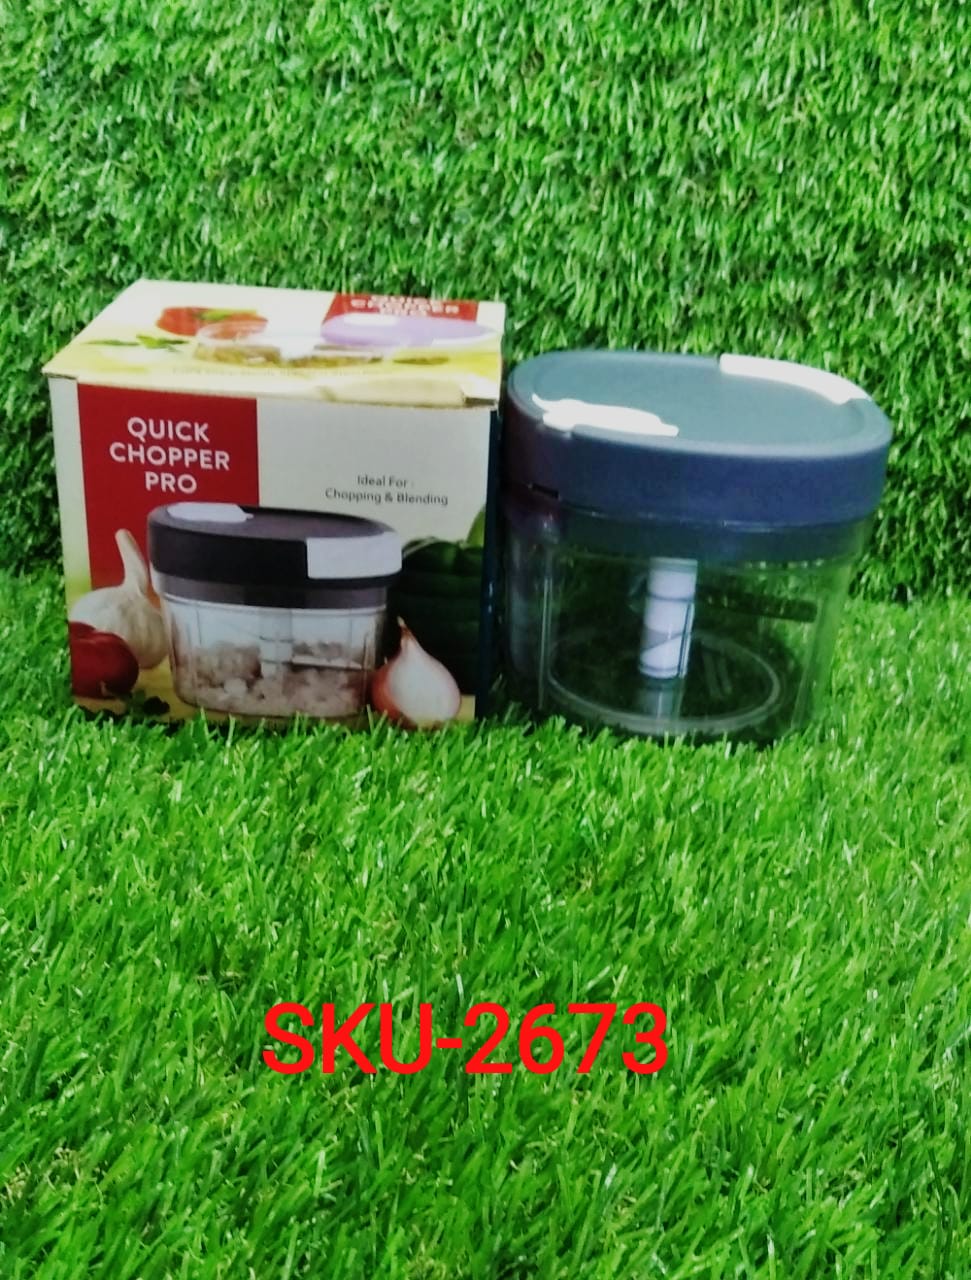 2673 Handy Chopper and Slicer Used Widely for chopping and Slicing of Fruits, Vegetables, Cheese Etc. Including All Kitchen Purposes